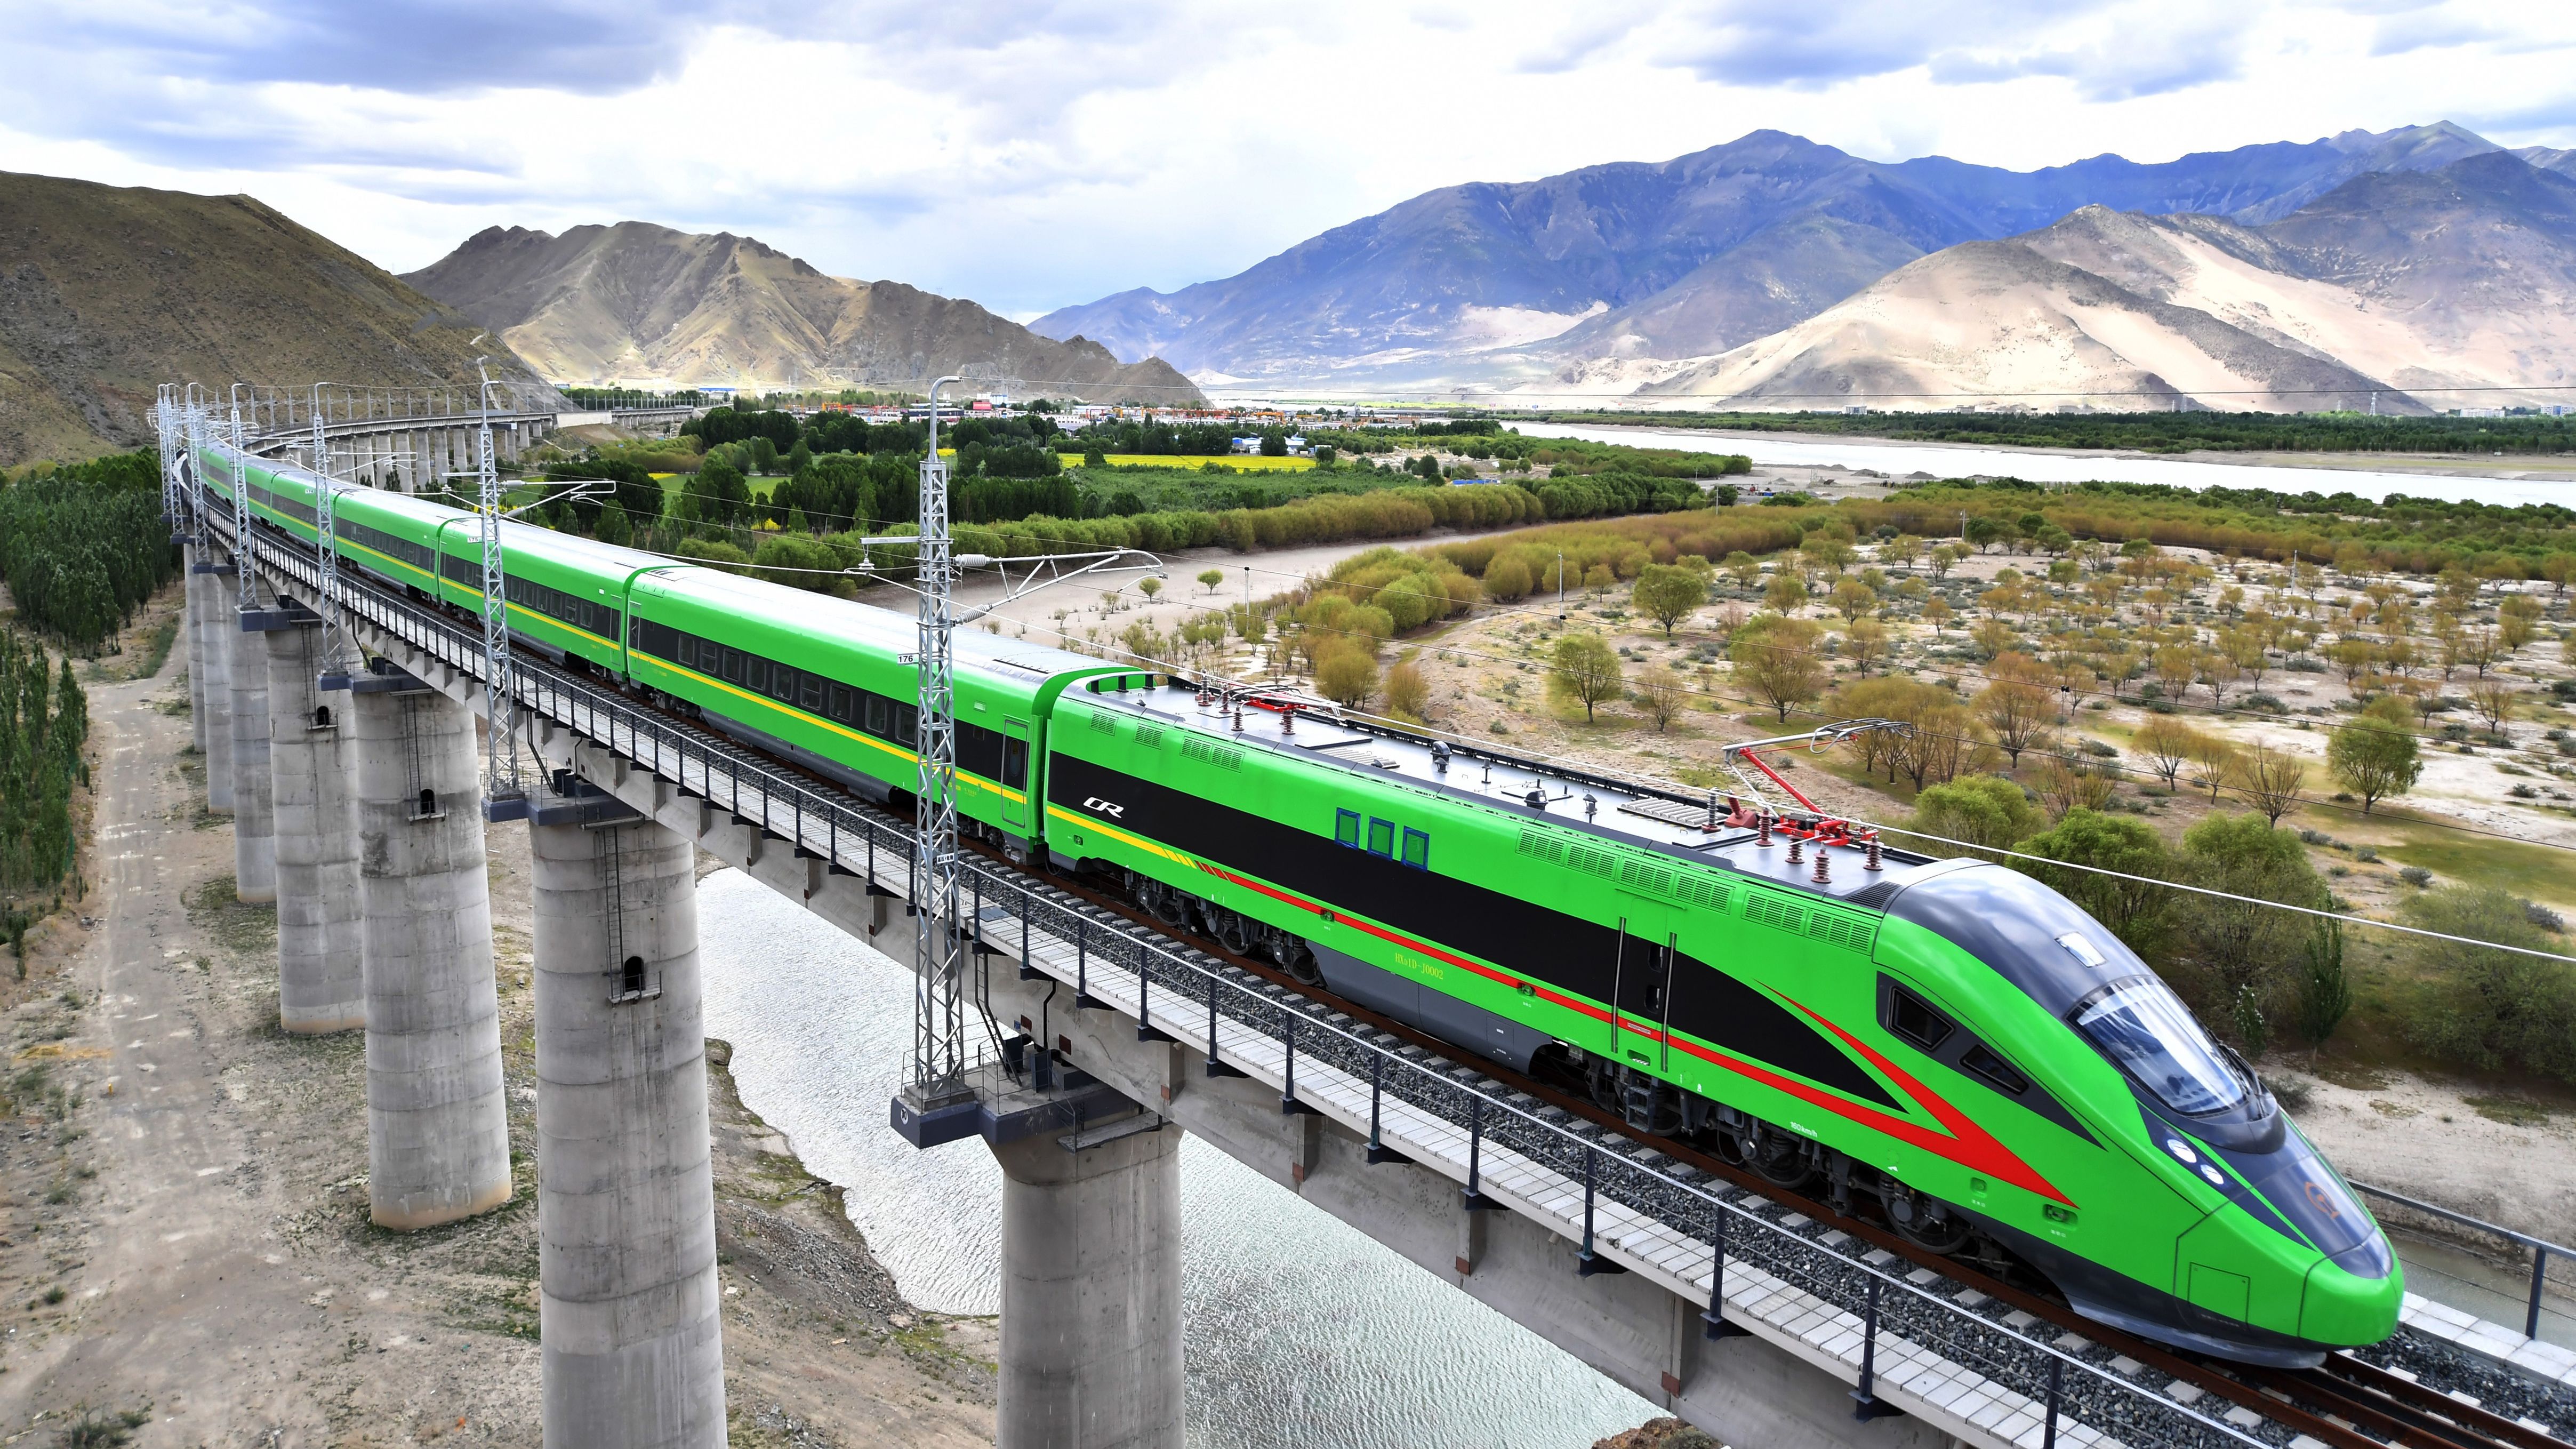 Who has the best high-speed trains?